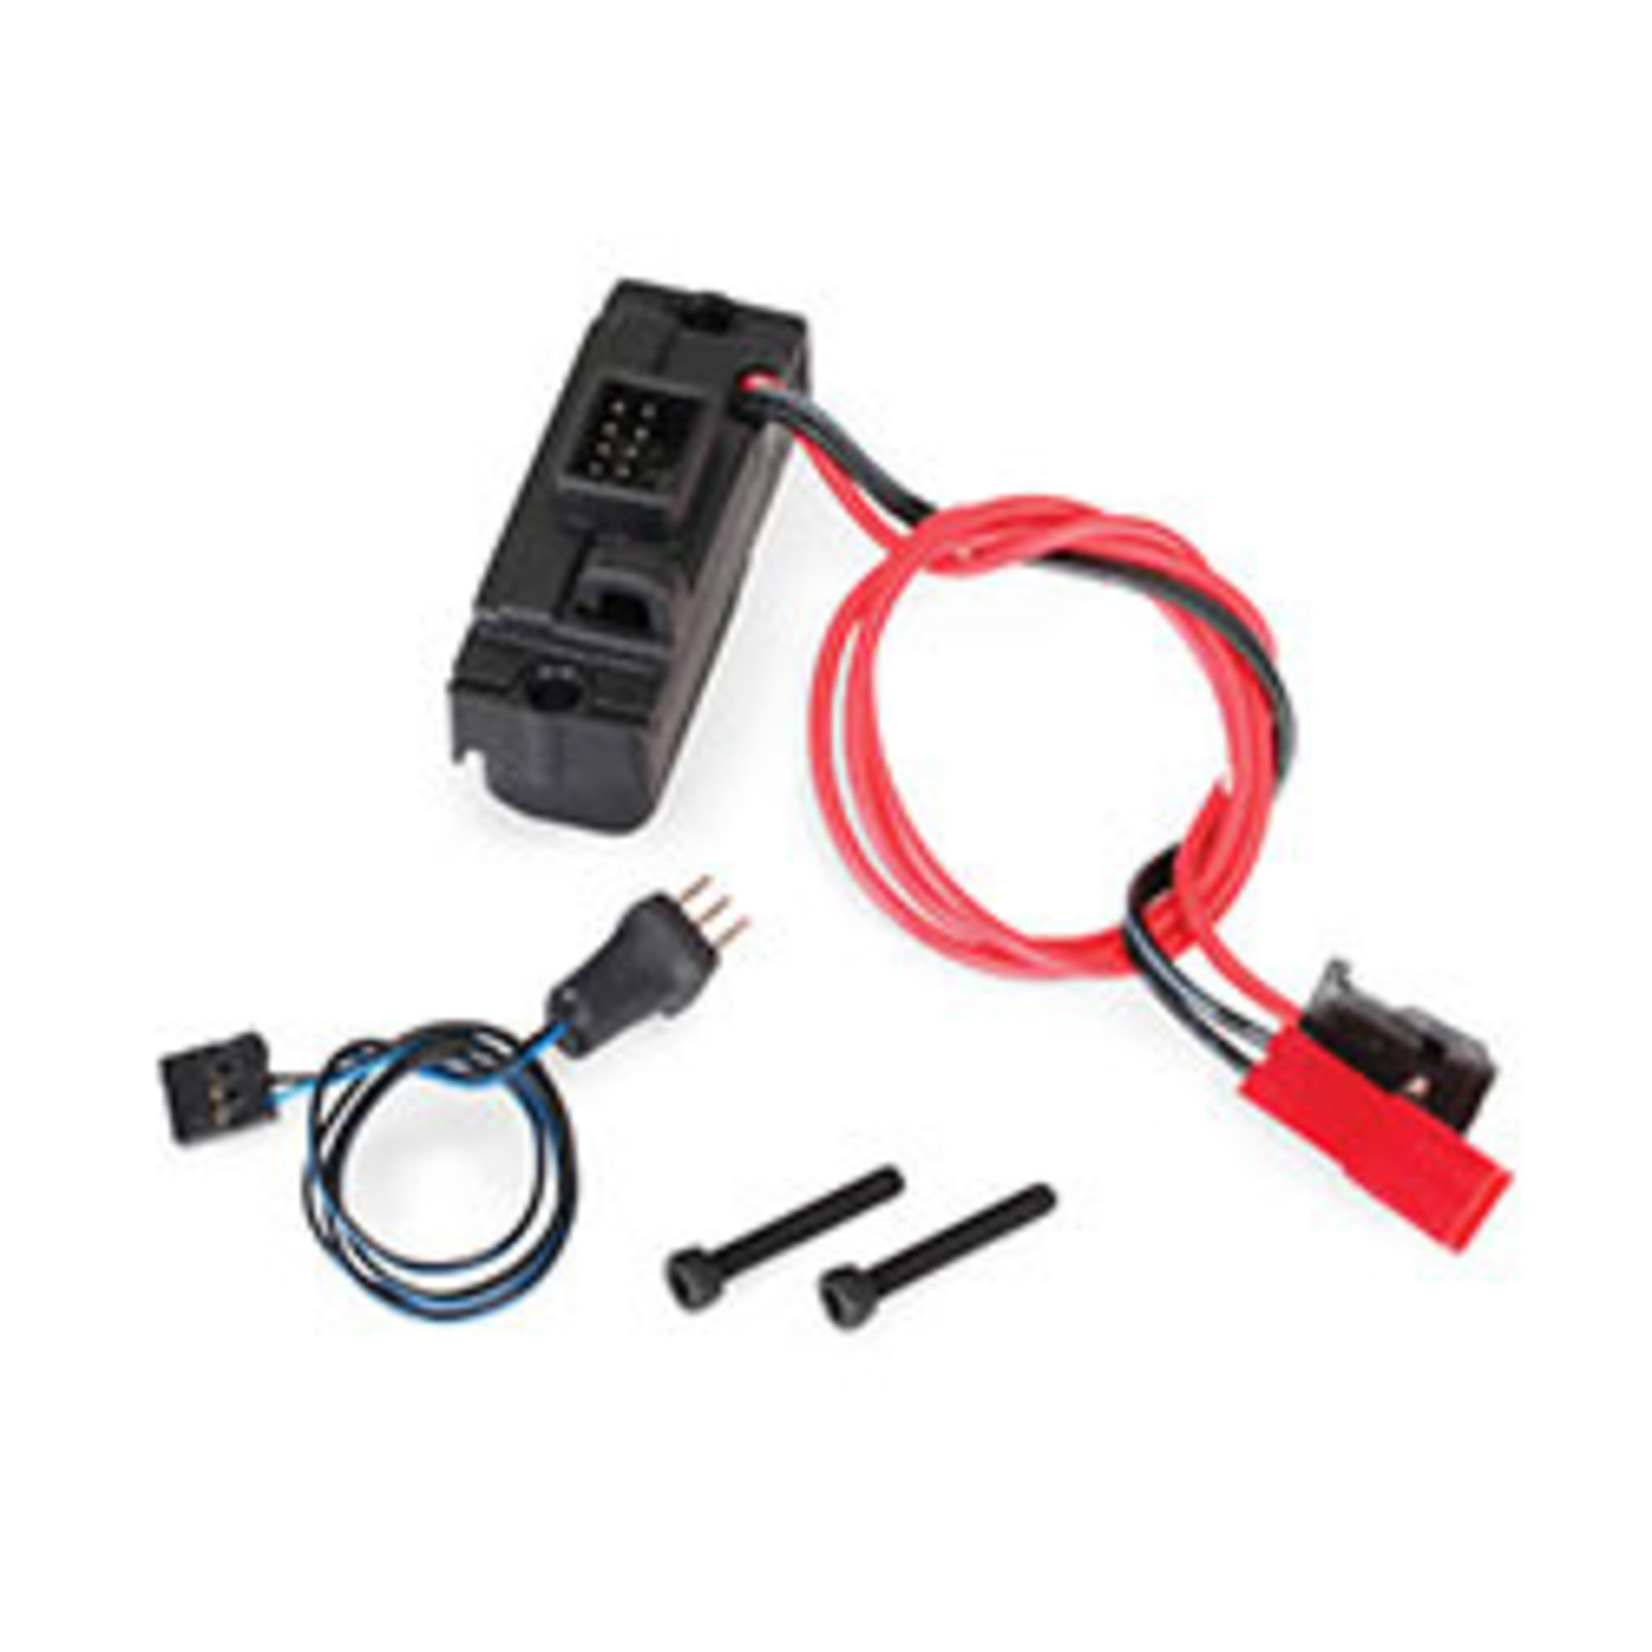 Traxxas 8028 LED lights, power supply (regulated, 3V, 0.5-amp)/ 3-in-1 wire harness